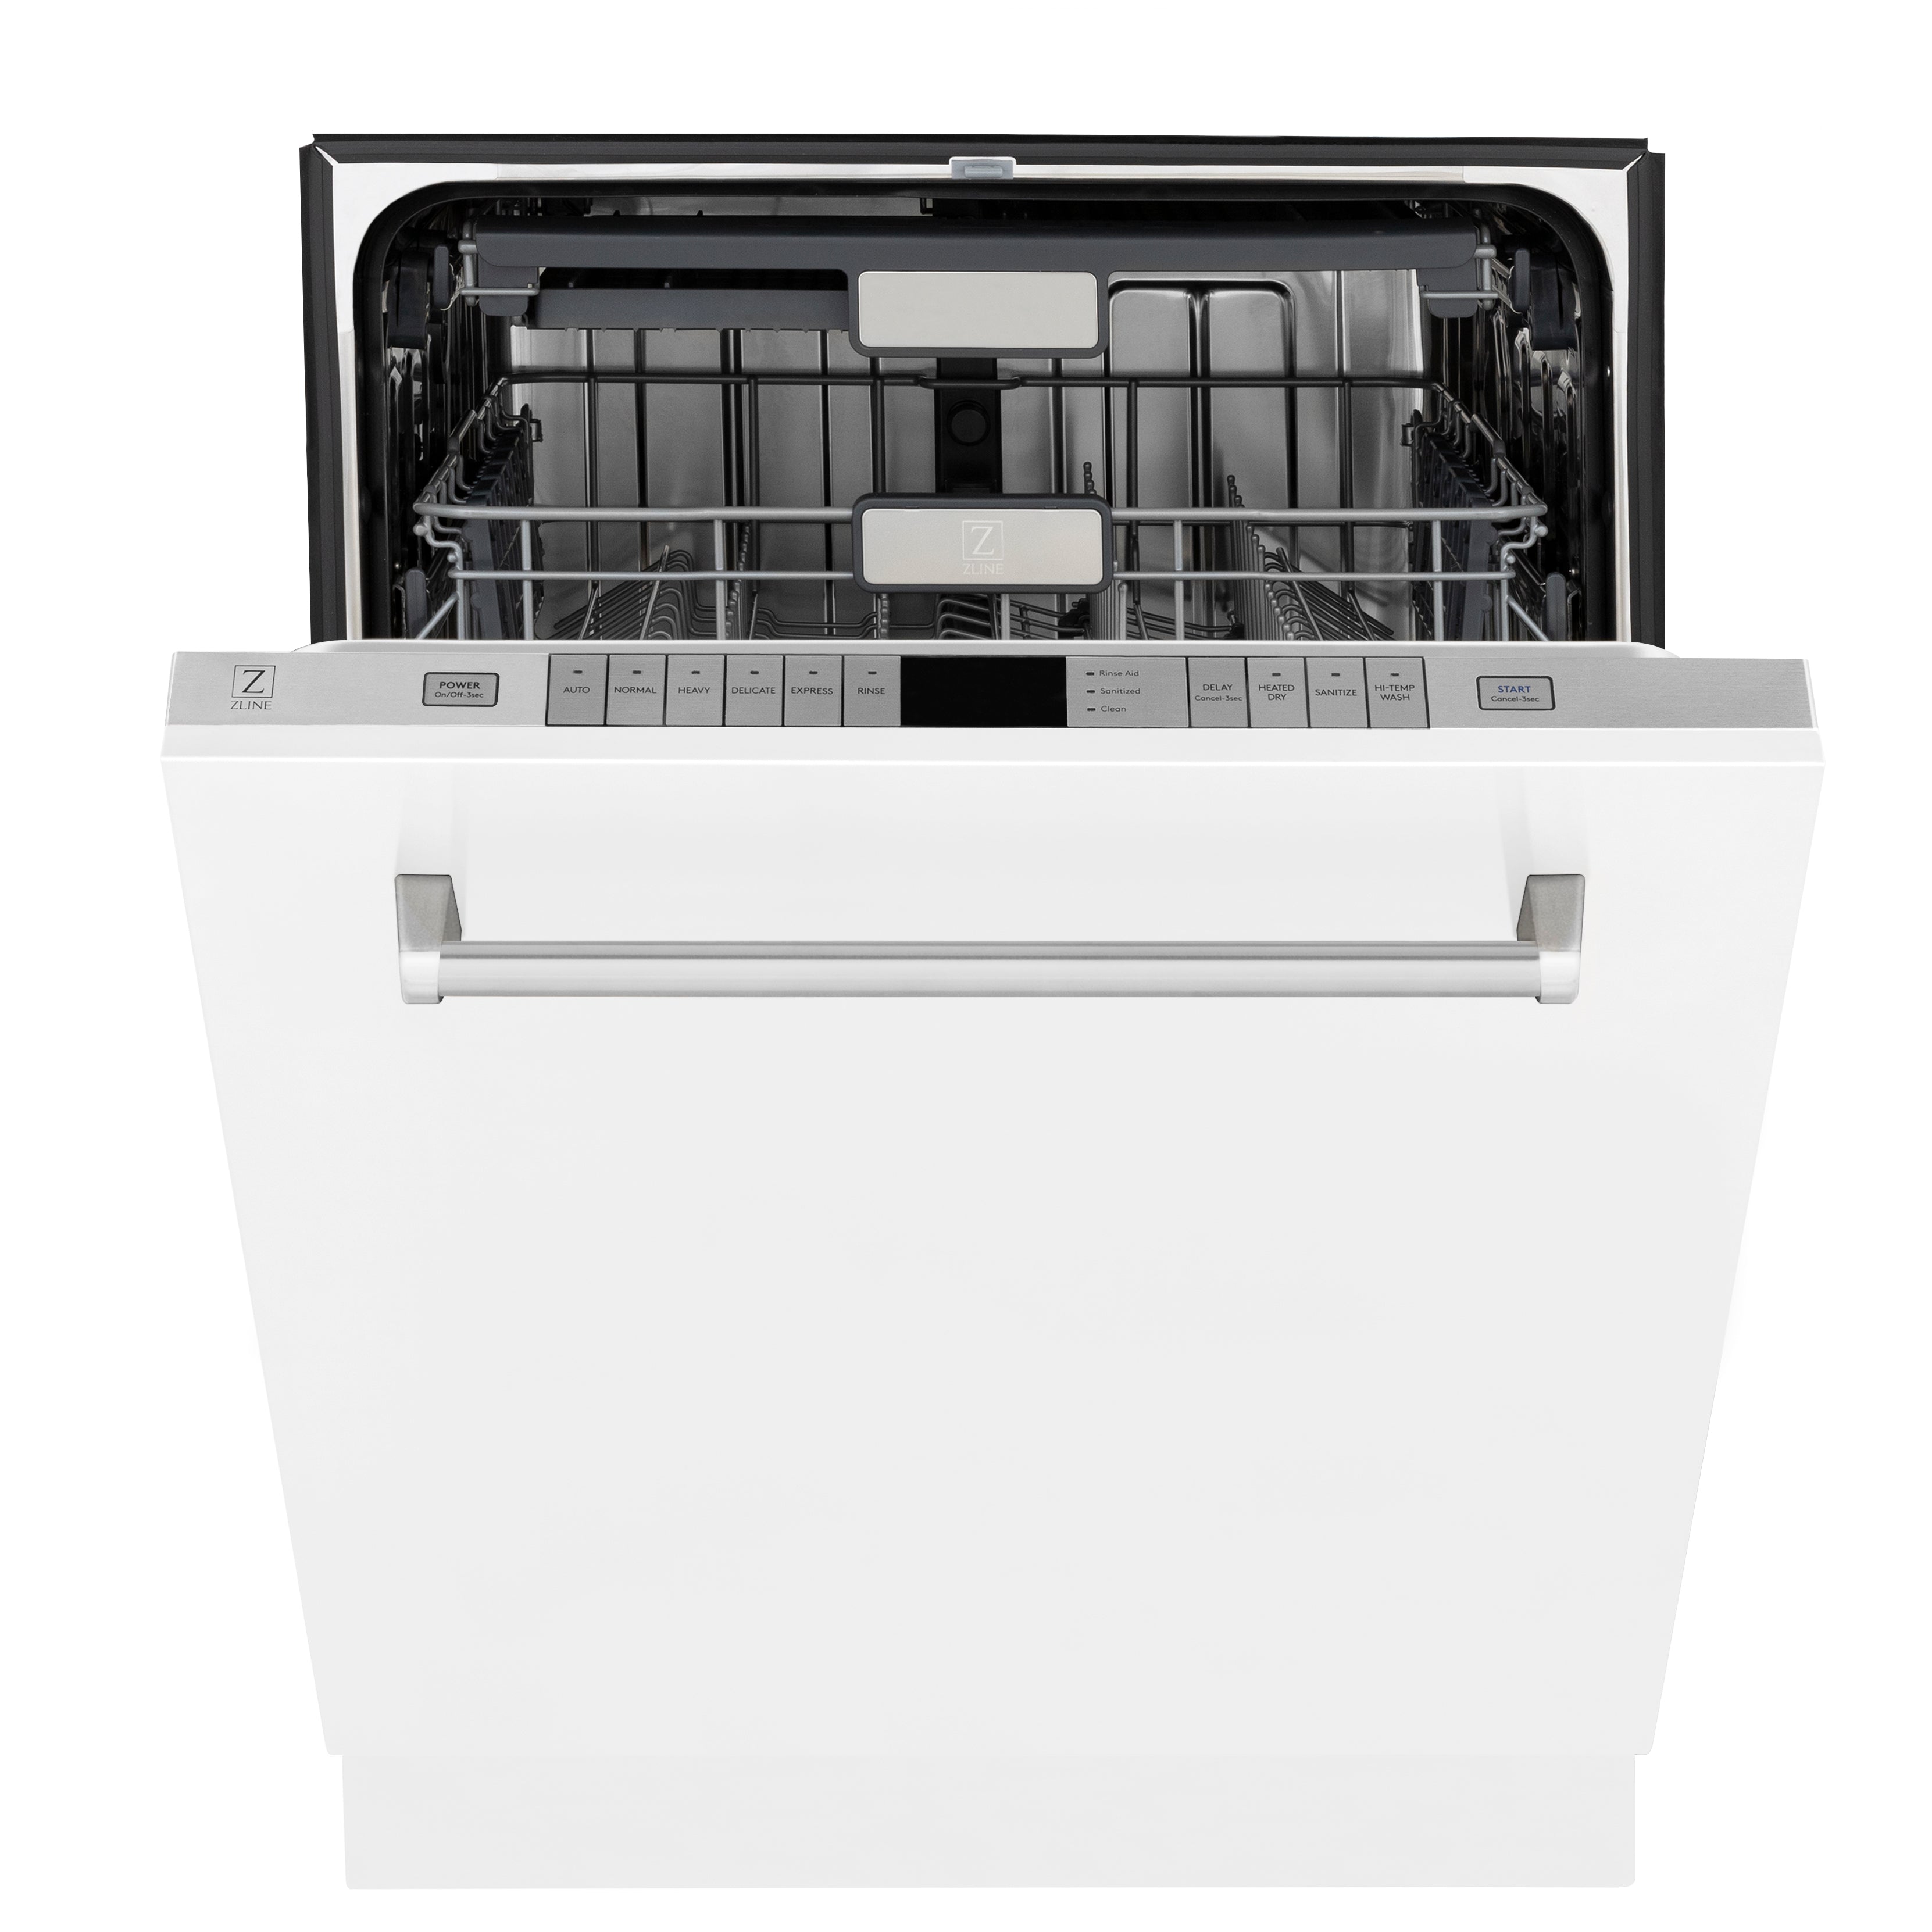 ZLINE 24" Monument Series 3rd Rack Top Touch Control Dishwasher in White Matte with Stainless Steel Tub, 45dBa